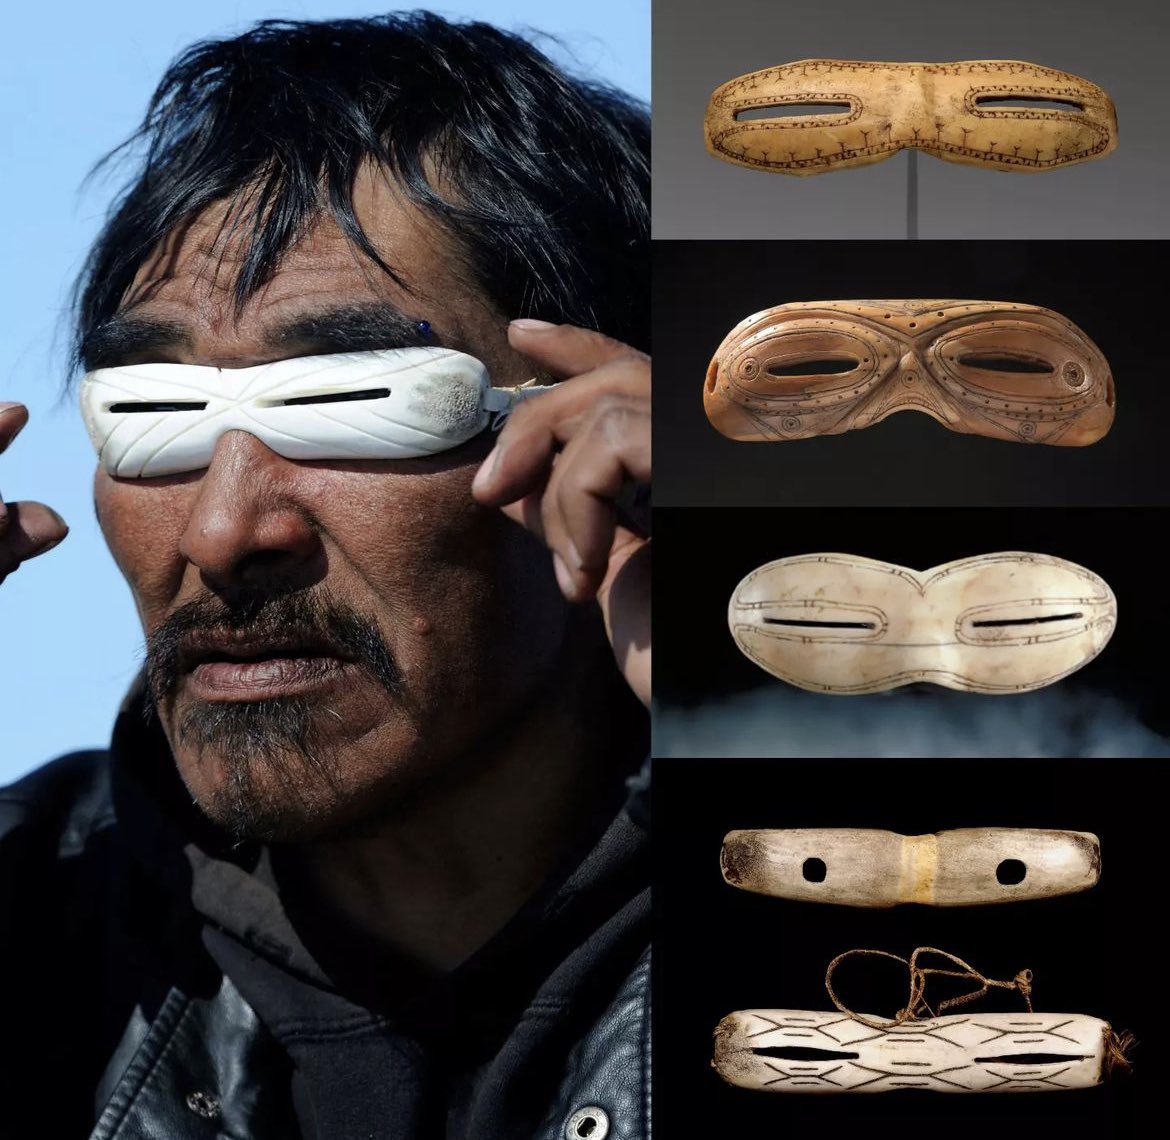 For thousands of years, the Inuit and Yupik people of the Arctic have been using traditional snow goggles made of walrus ivory, caribou antler, or driftwood.

The narrow slits helped reduce eye strain and prevent snow blindness. Unlike modern snow goggles, these traditional ones